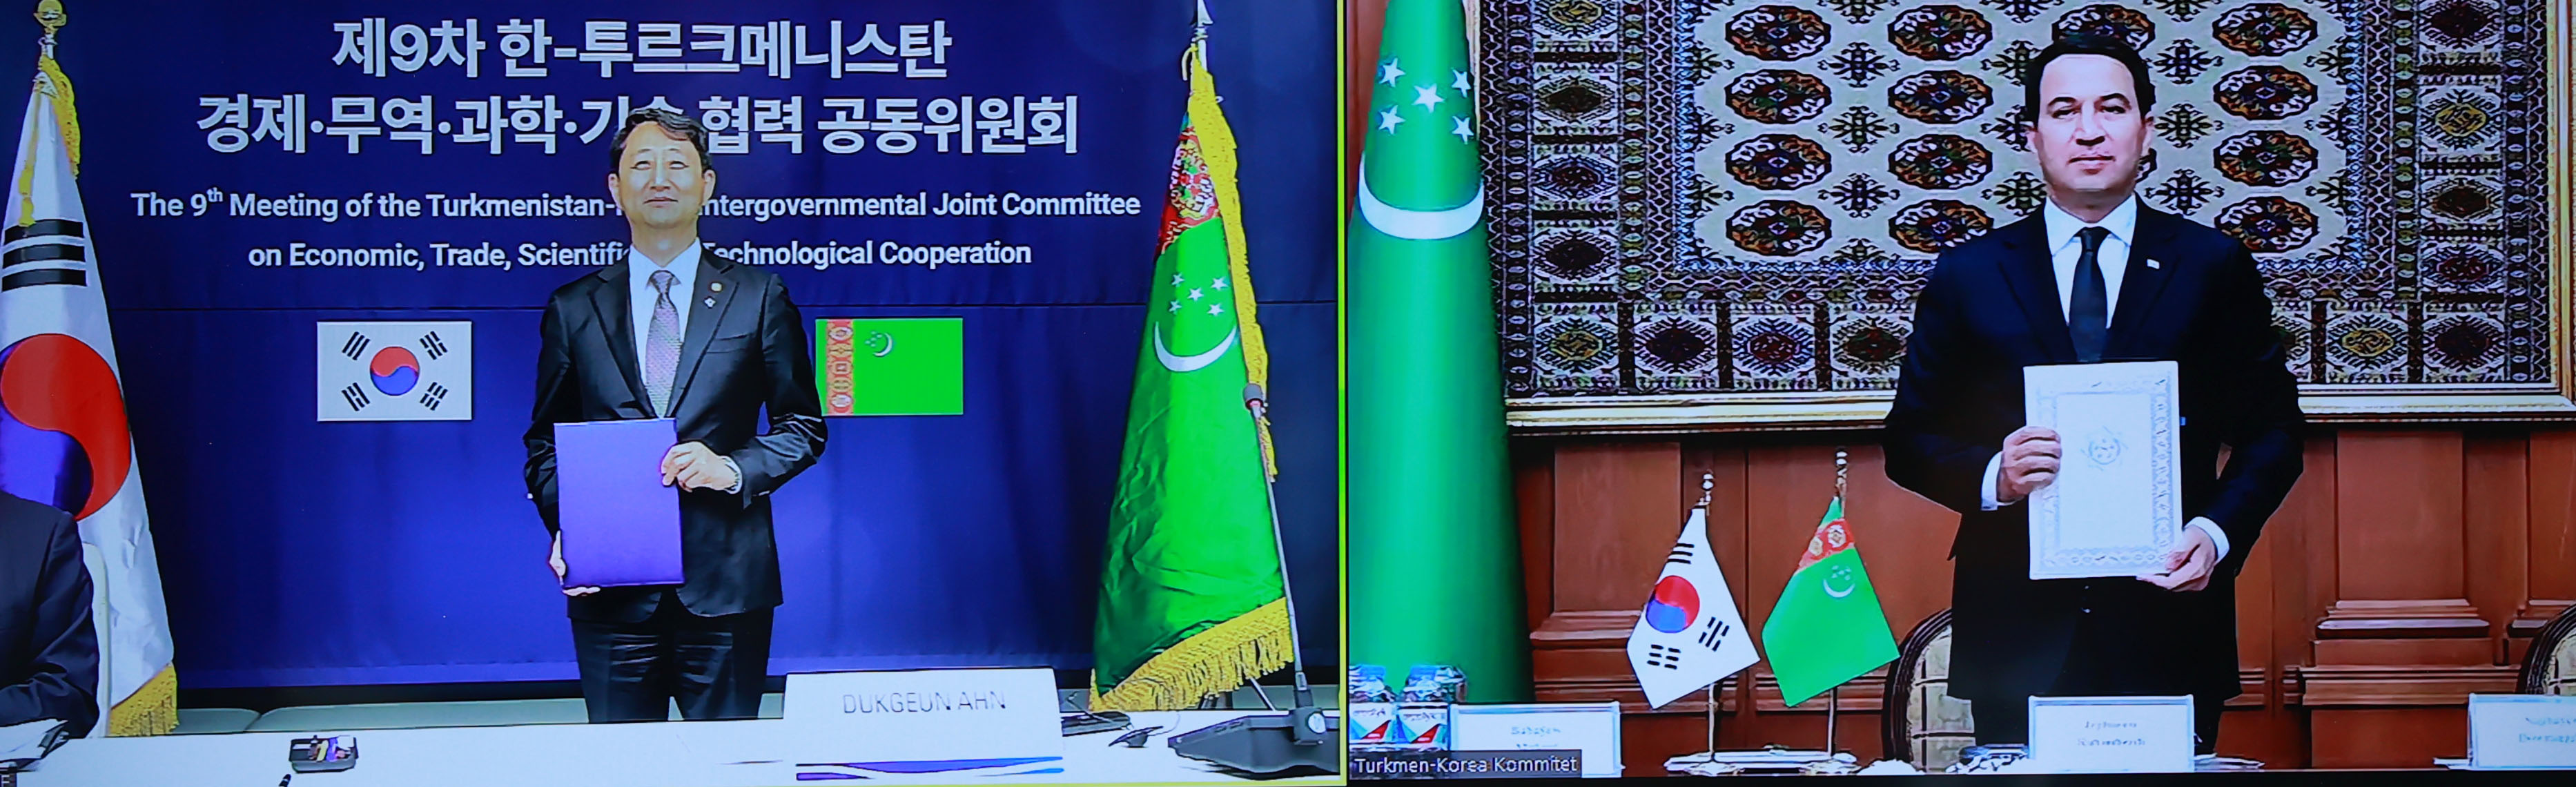 9th meeting of the Intergovernmental Korea-Turkmenistan Commission on Trade, Economic, Scientific and Technological Cooperation_2